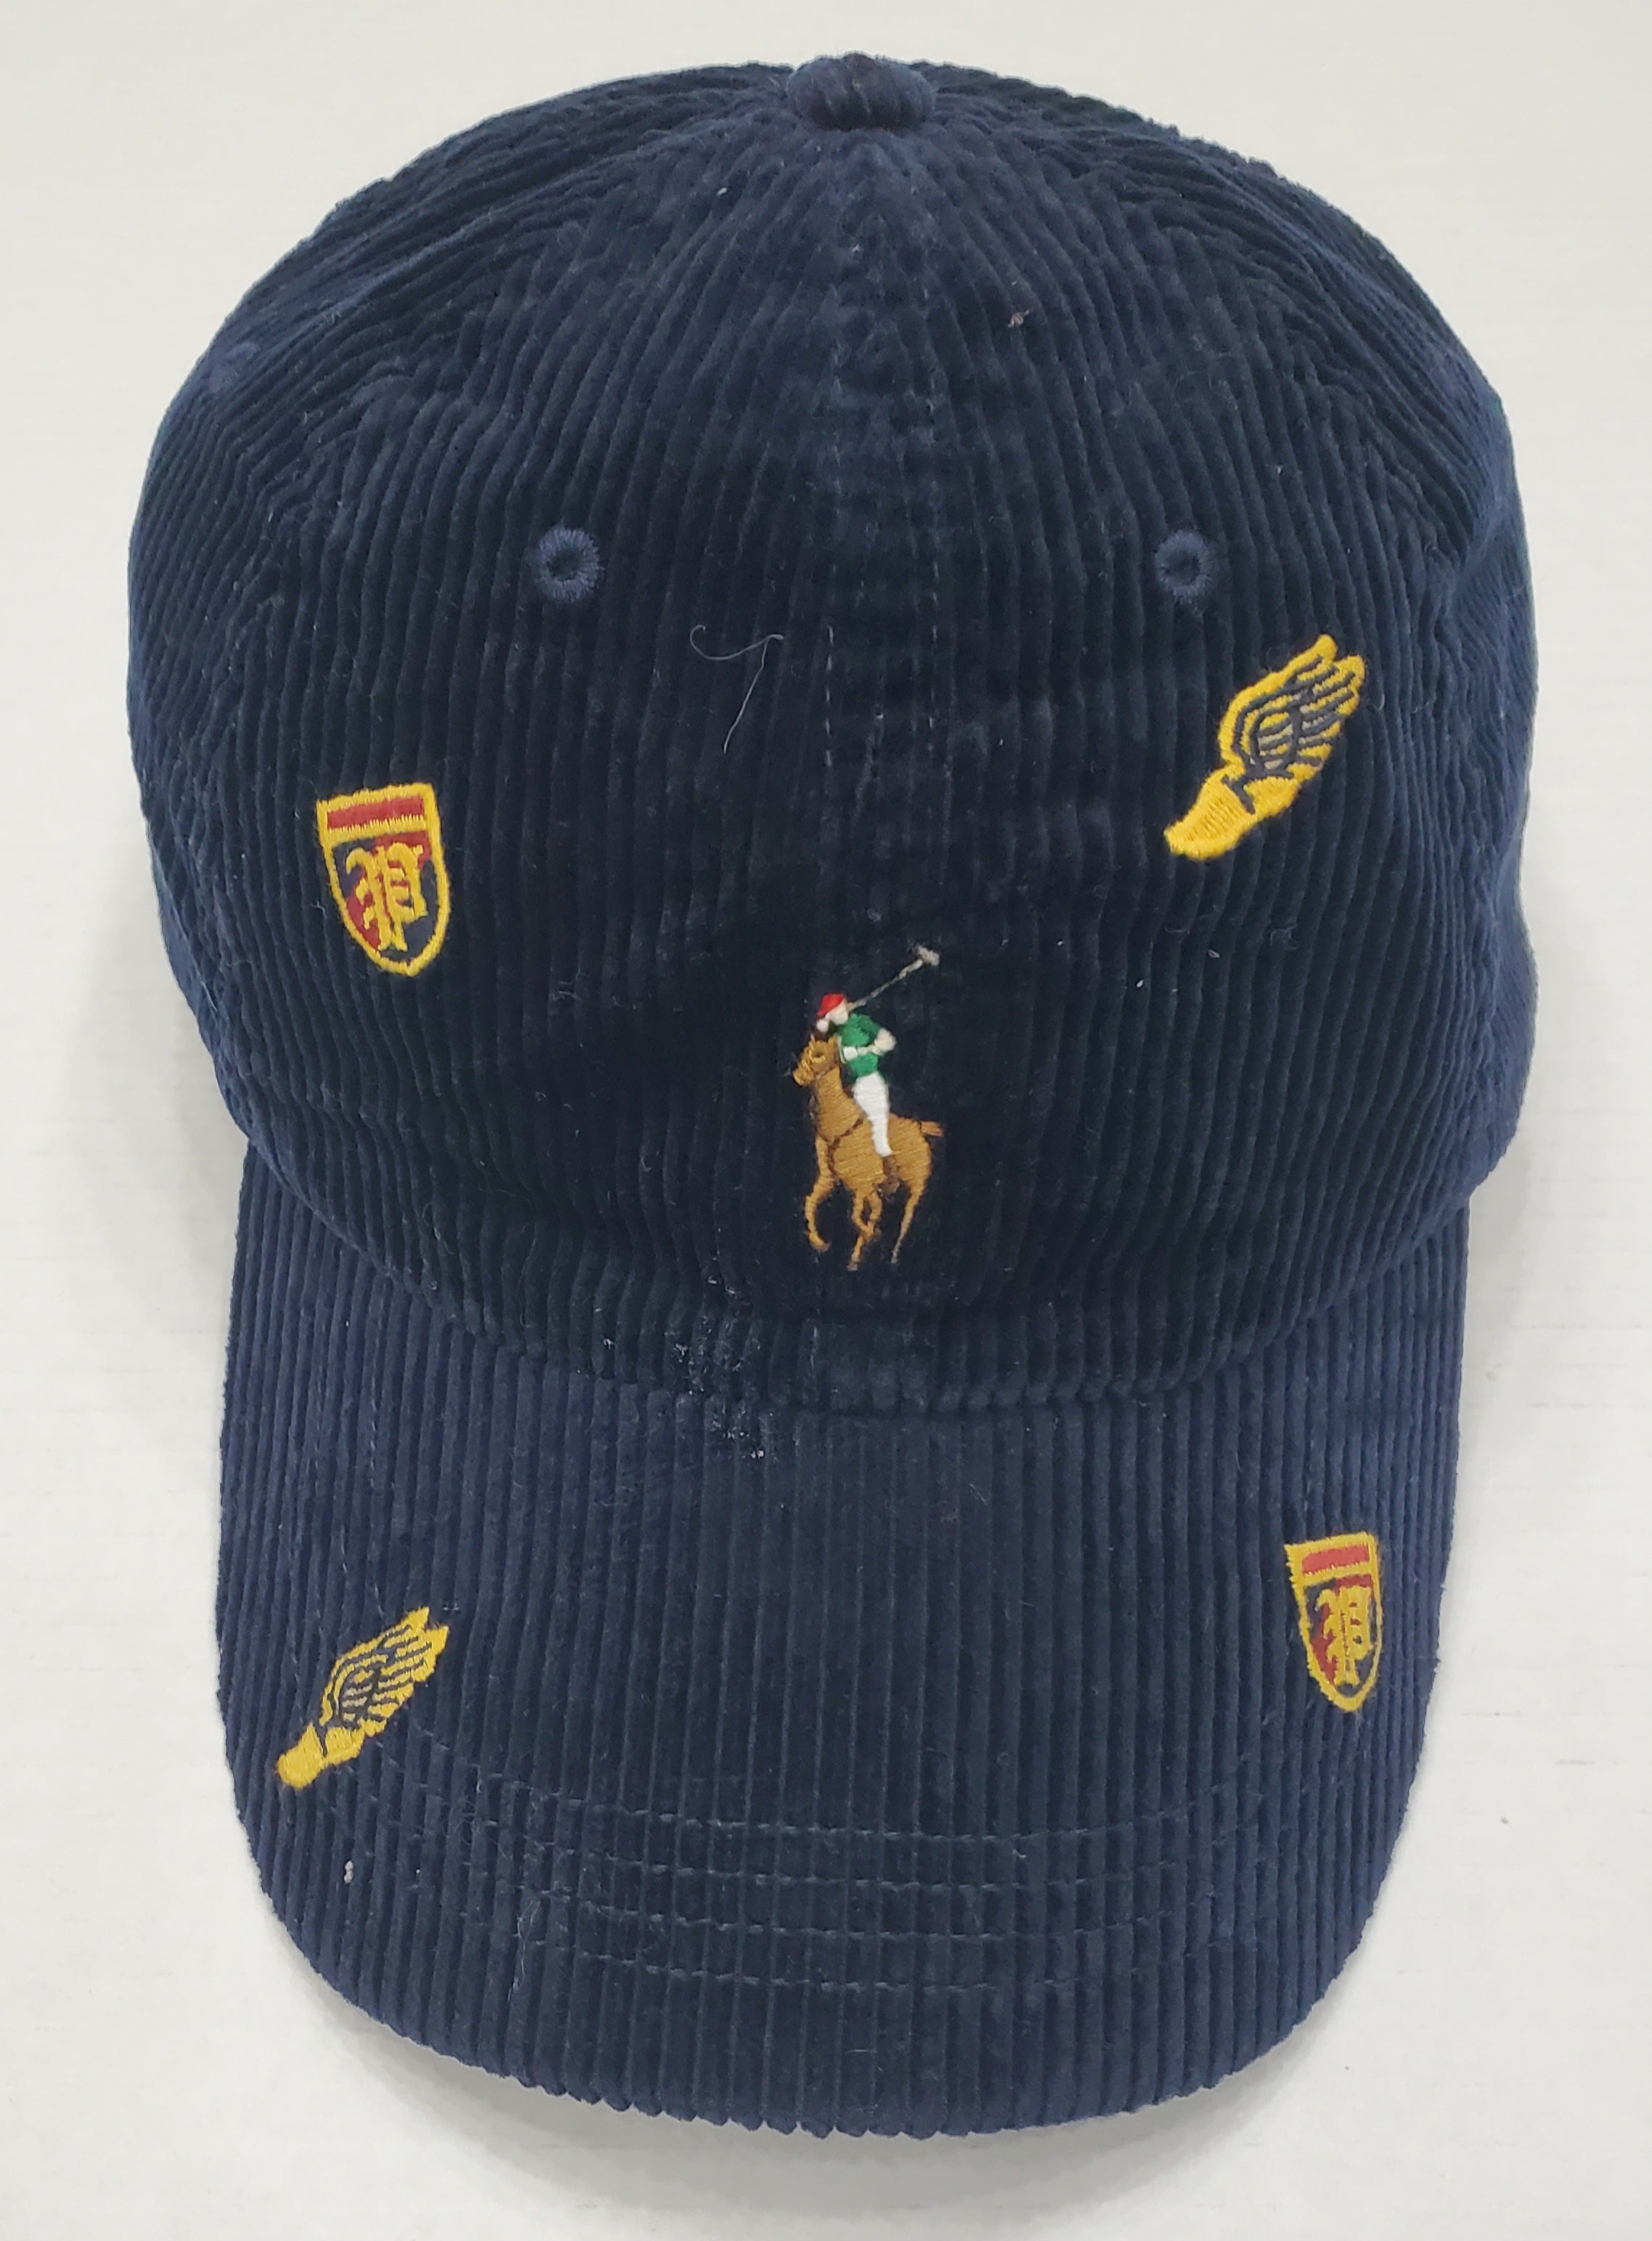 Strap Corduroy Style Ralph Lauren Nwt Embroidered | Polo Leather Navy Adjustable Unique Hat